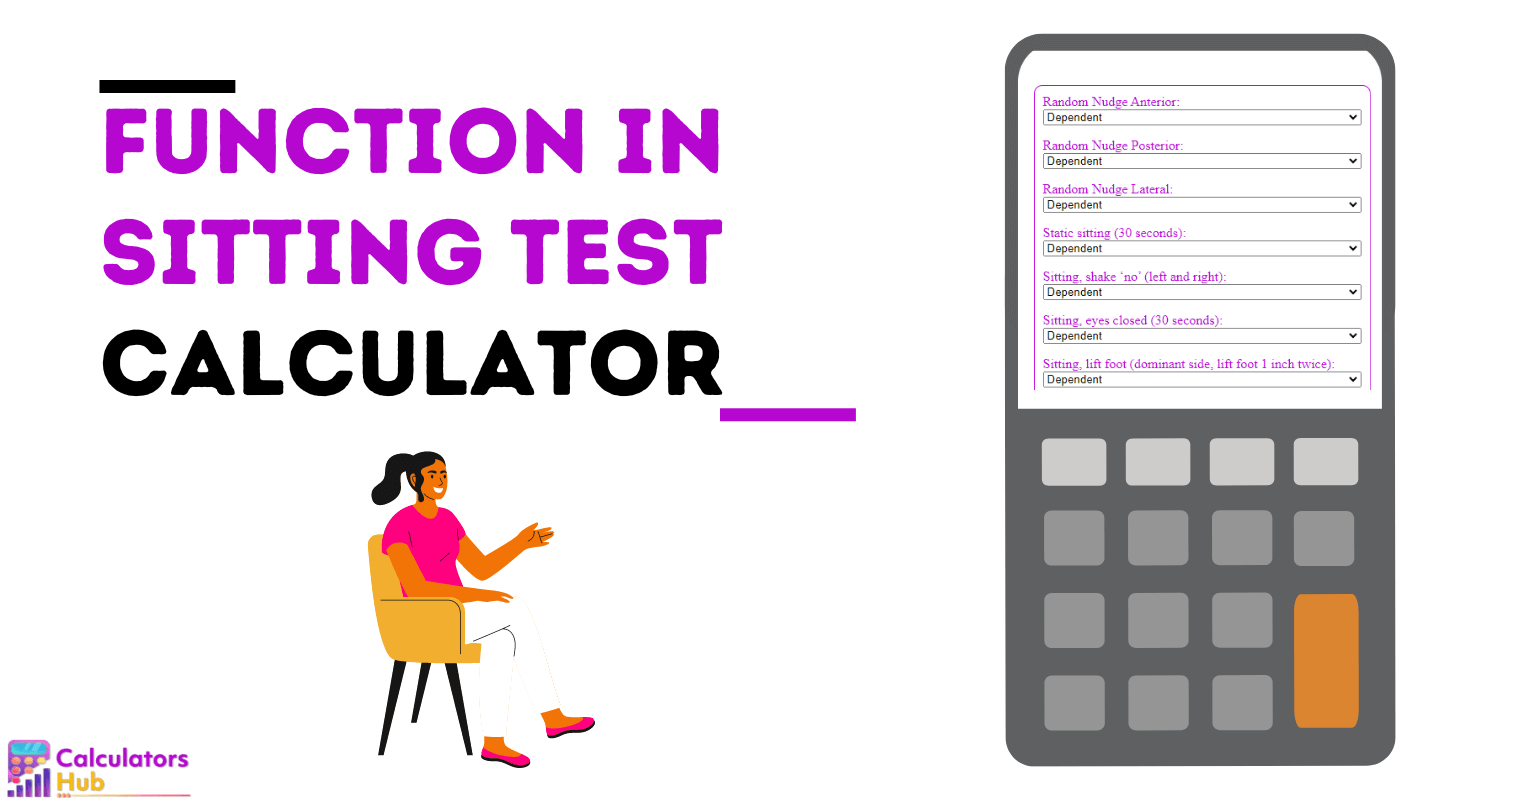 Function in Sitting Test Calculator